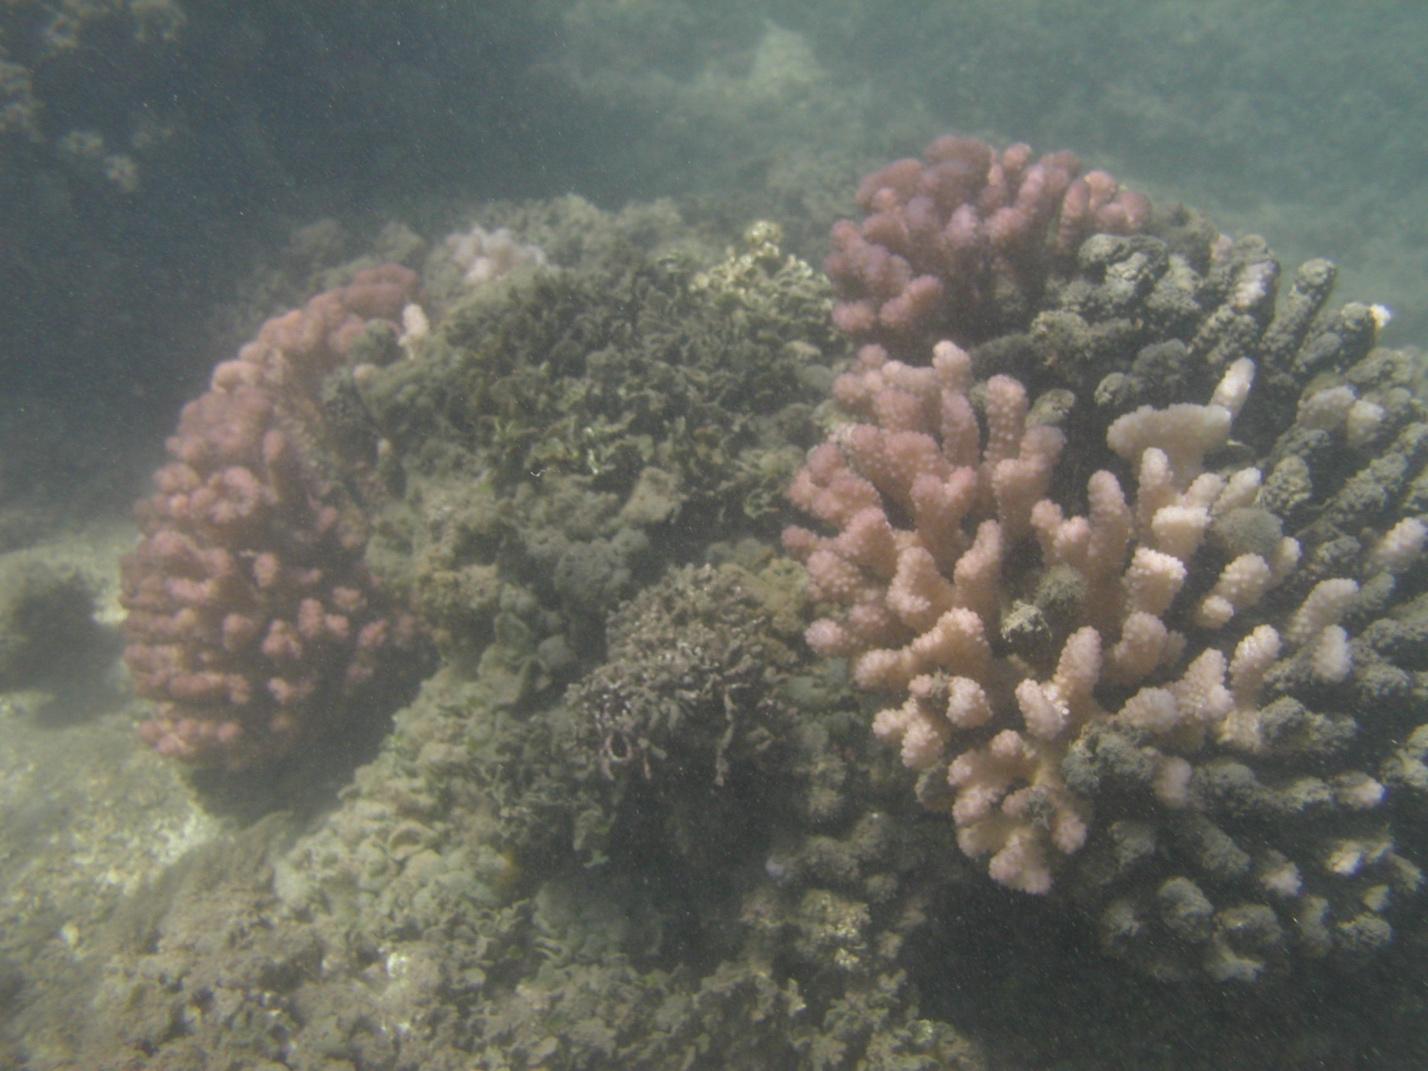 Underwater view of coral in some shades of pink where it is alive, shades of brown and green where it's dying.